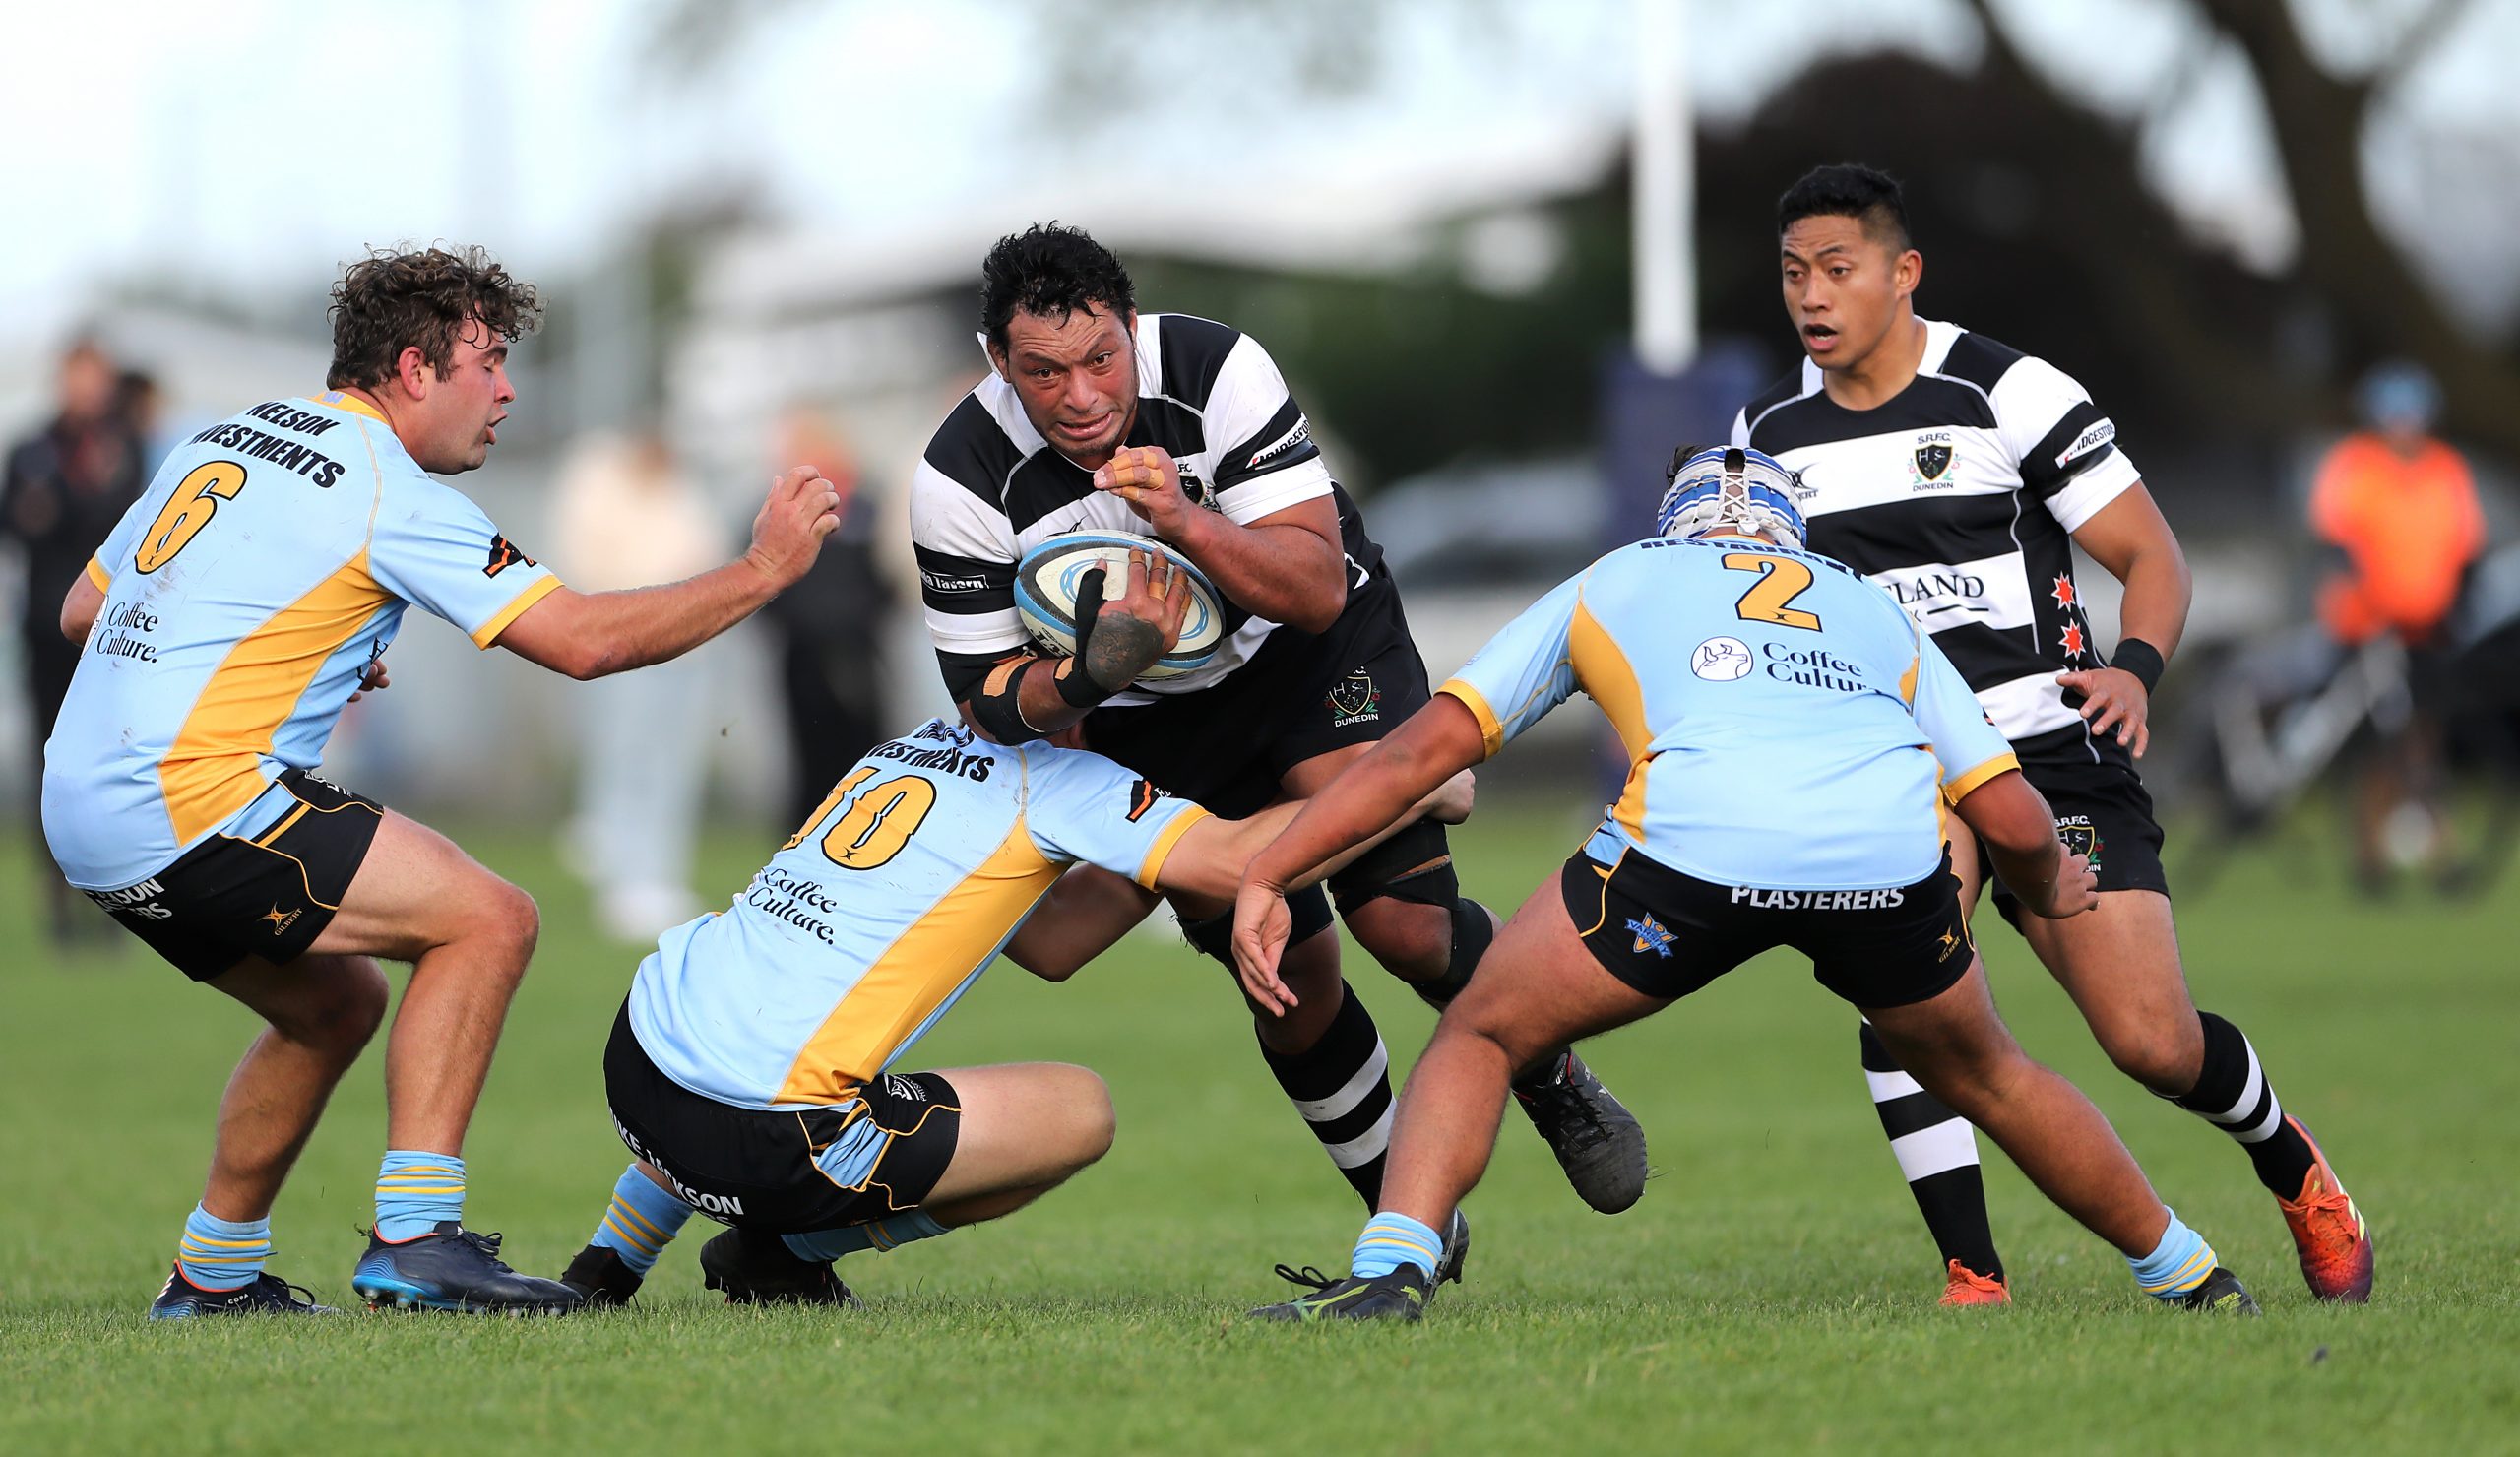 Mika Mafi of Southern makes a run during the club rugby match between Southern and Otago University played for the V.G.Cavanagh Memorial Trophy at Bathgate Park in Dunedin on Saturday 30th April, 2022. © John Caswell / http://www.caswellimages.com